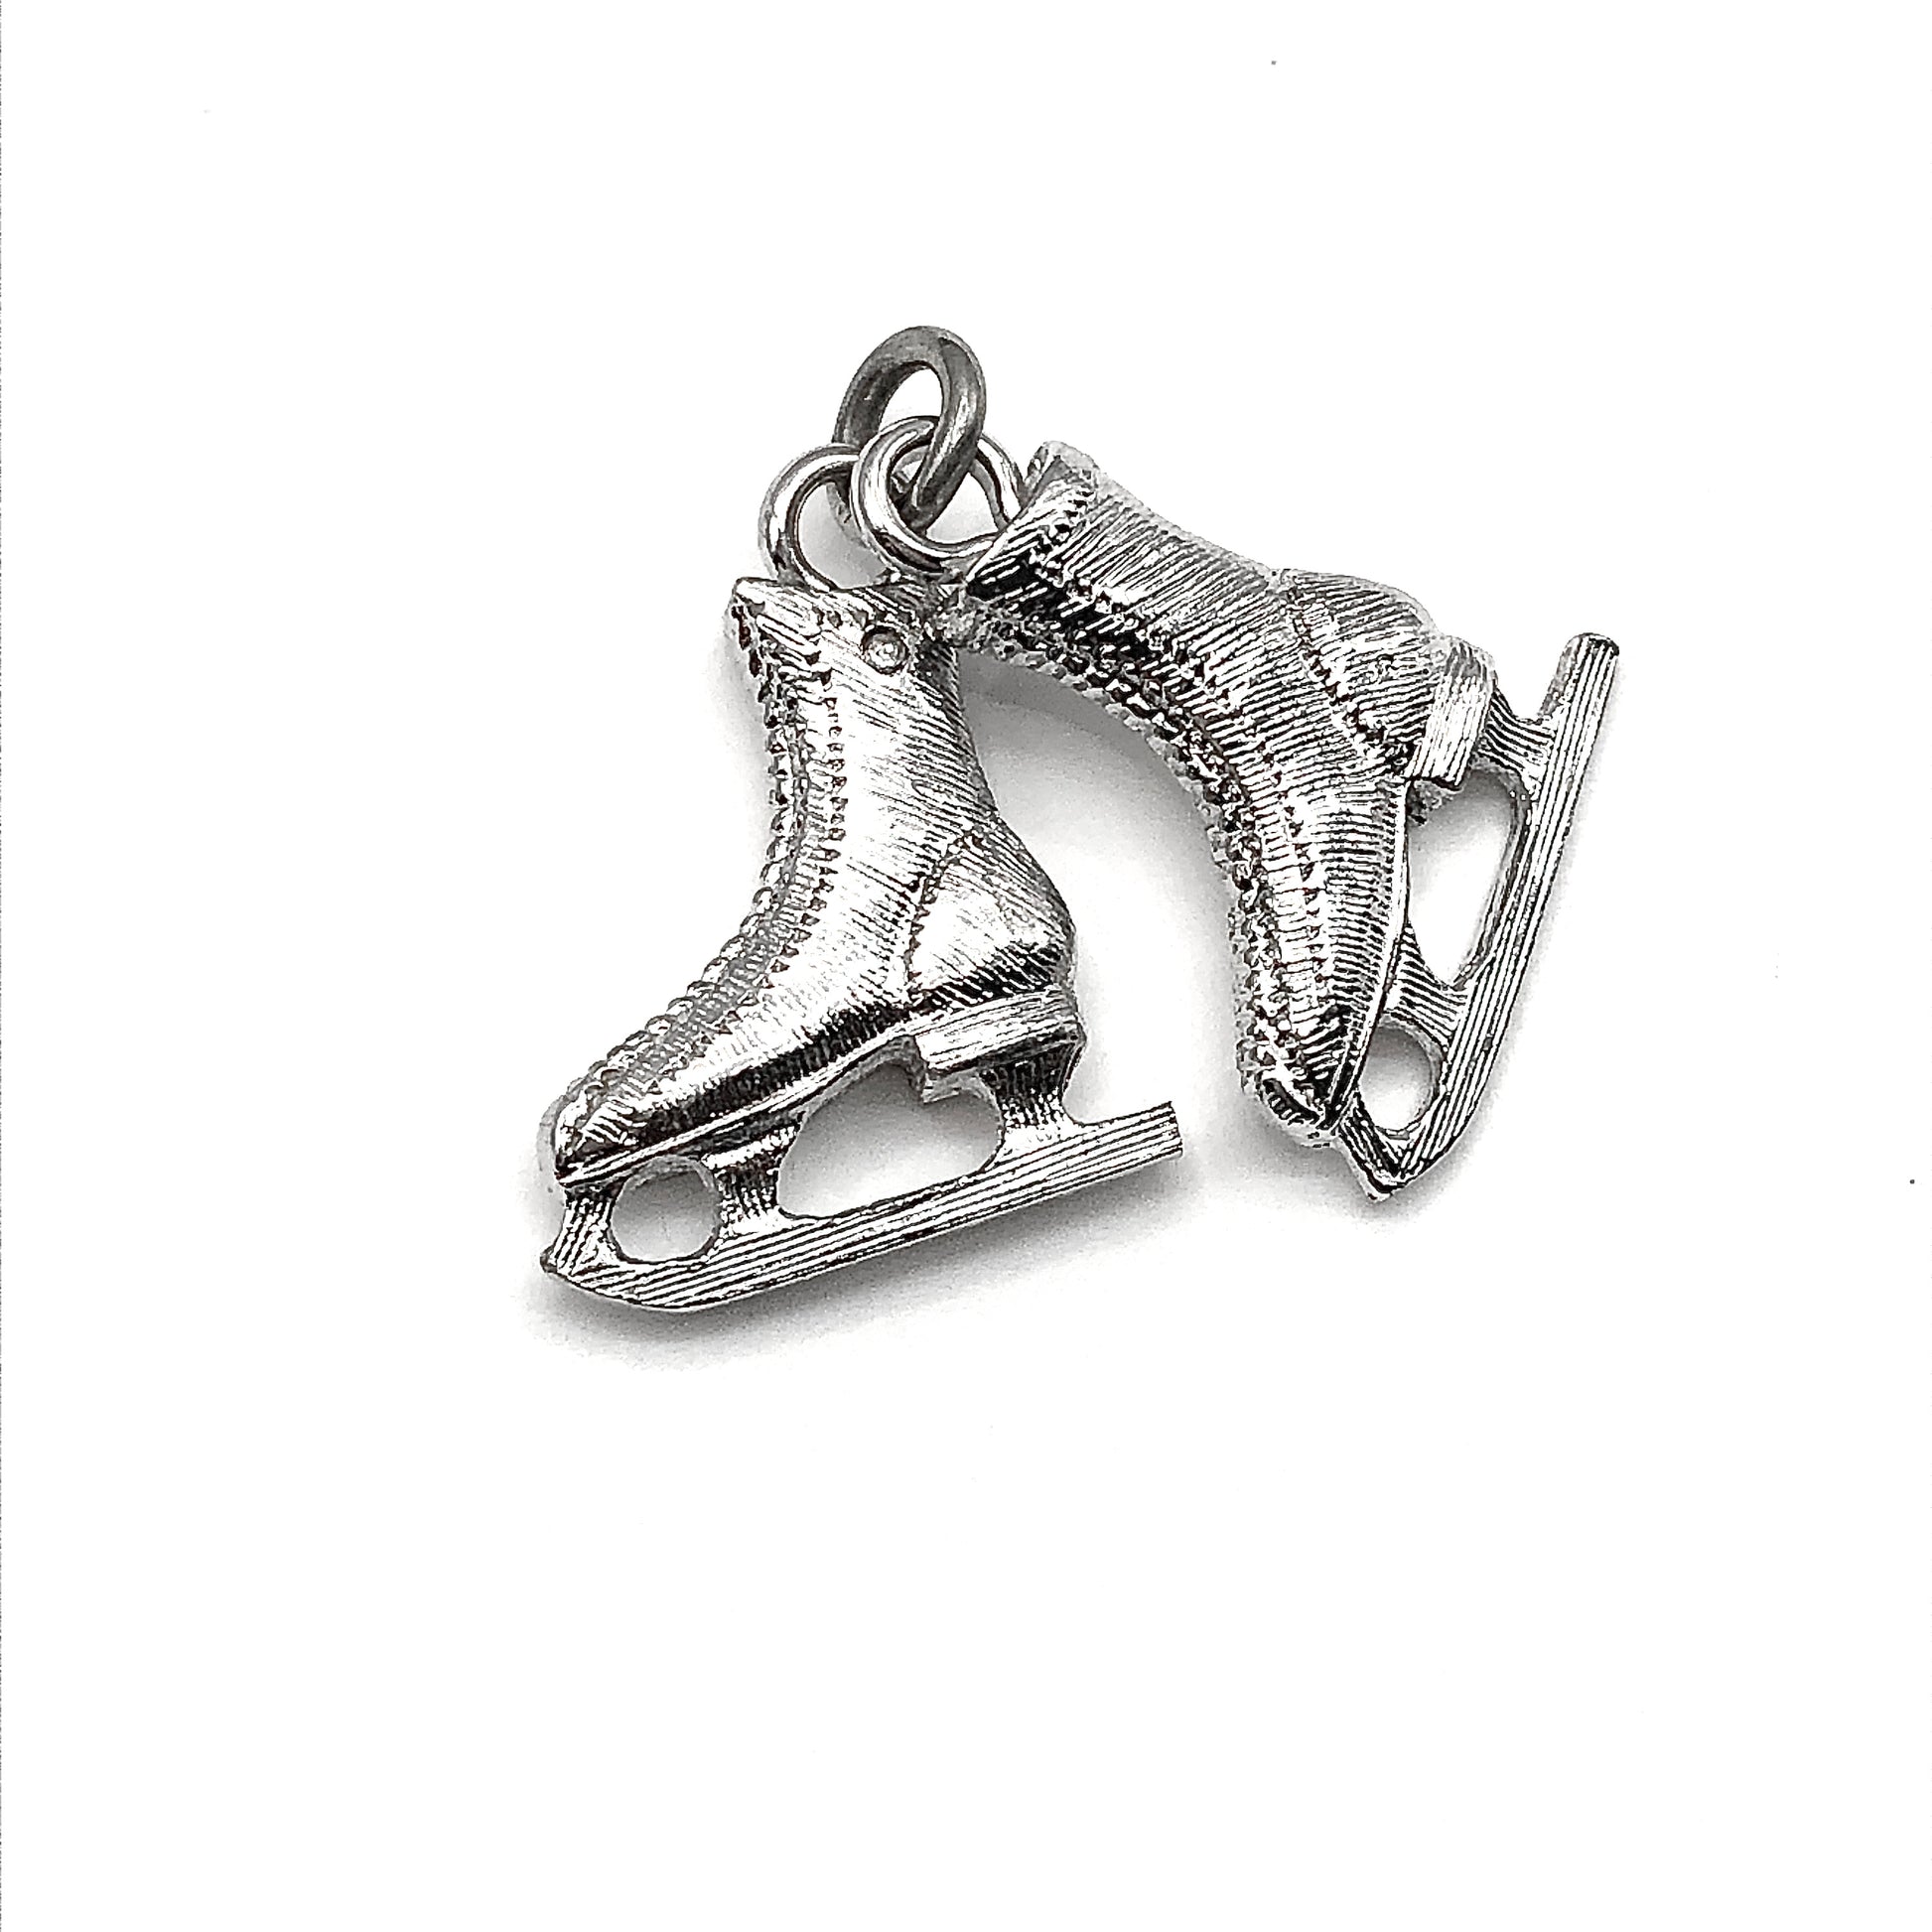 3D Bracelet Charm - Ice Skates | Goodie Two Shoes - Vintage 3-D Figure Skating Charms